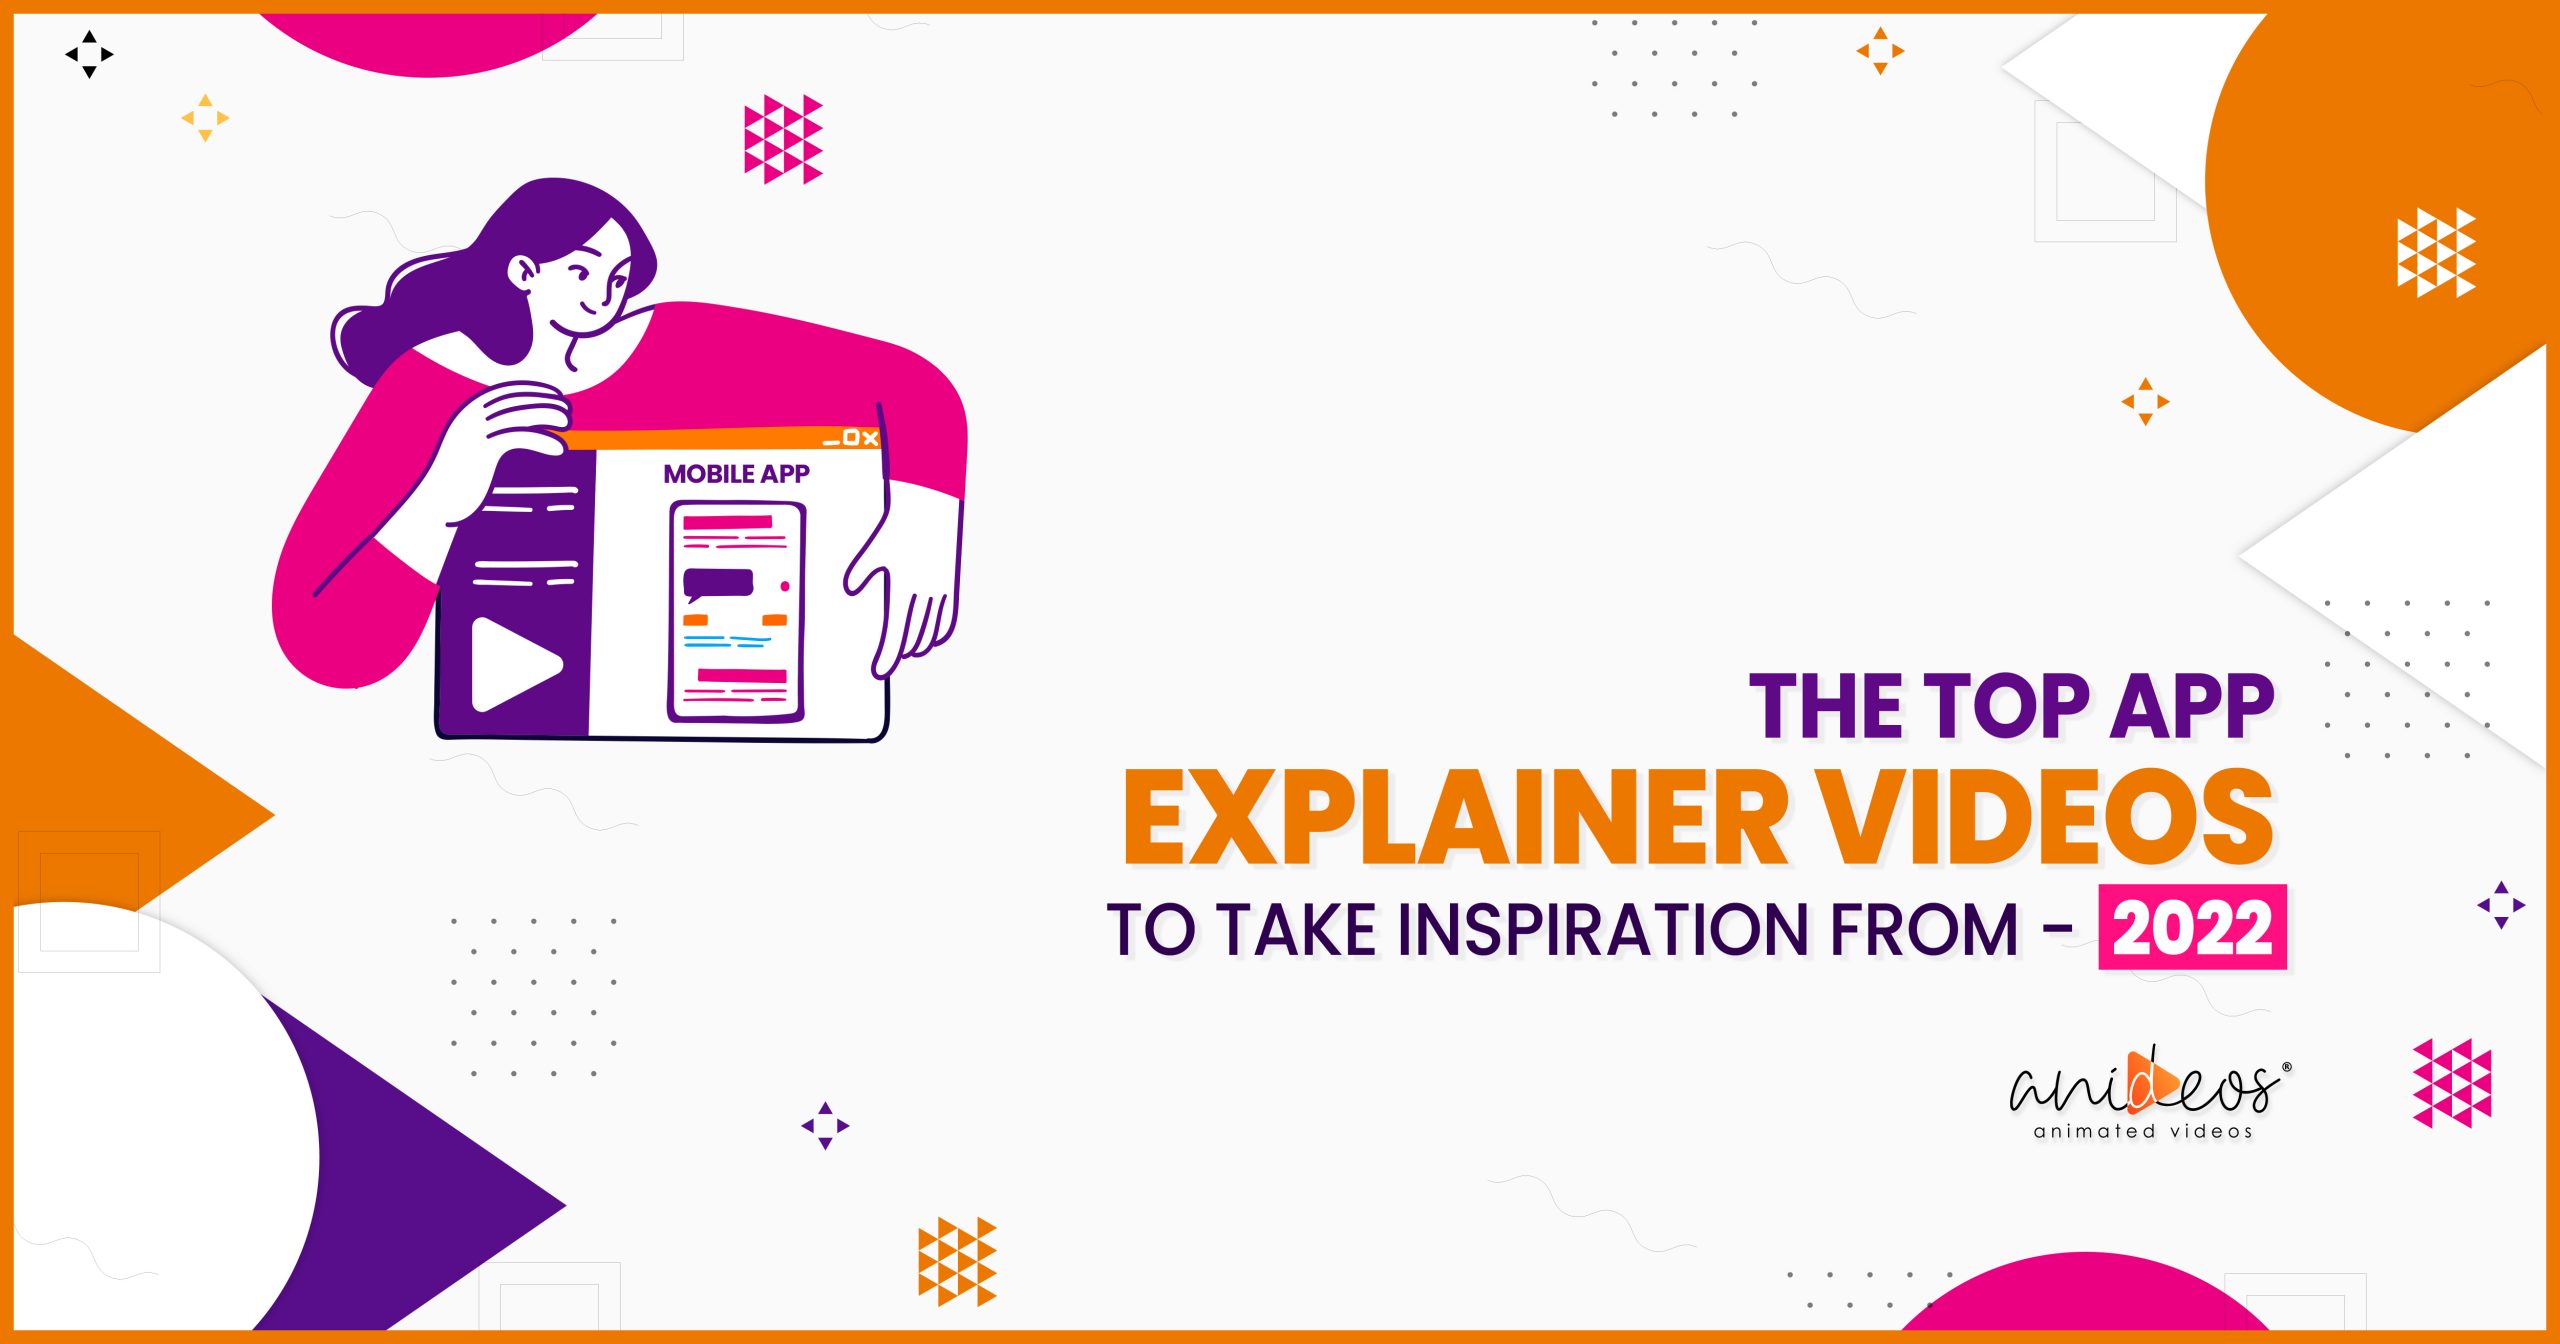 The Top App Explainer Videos to Take Inspiration From - 2022